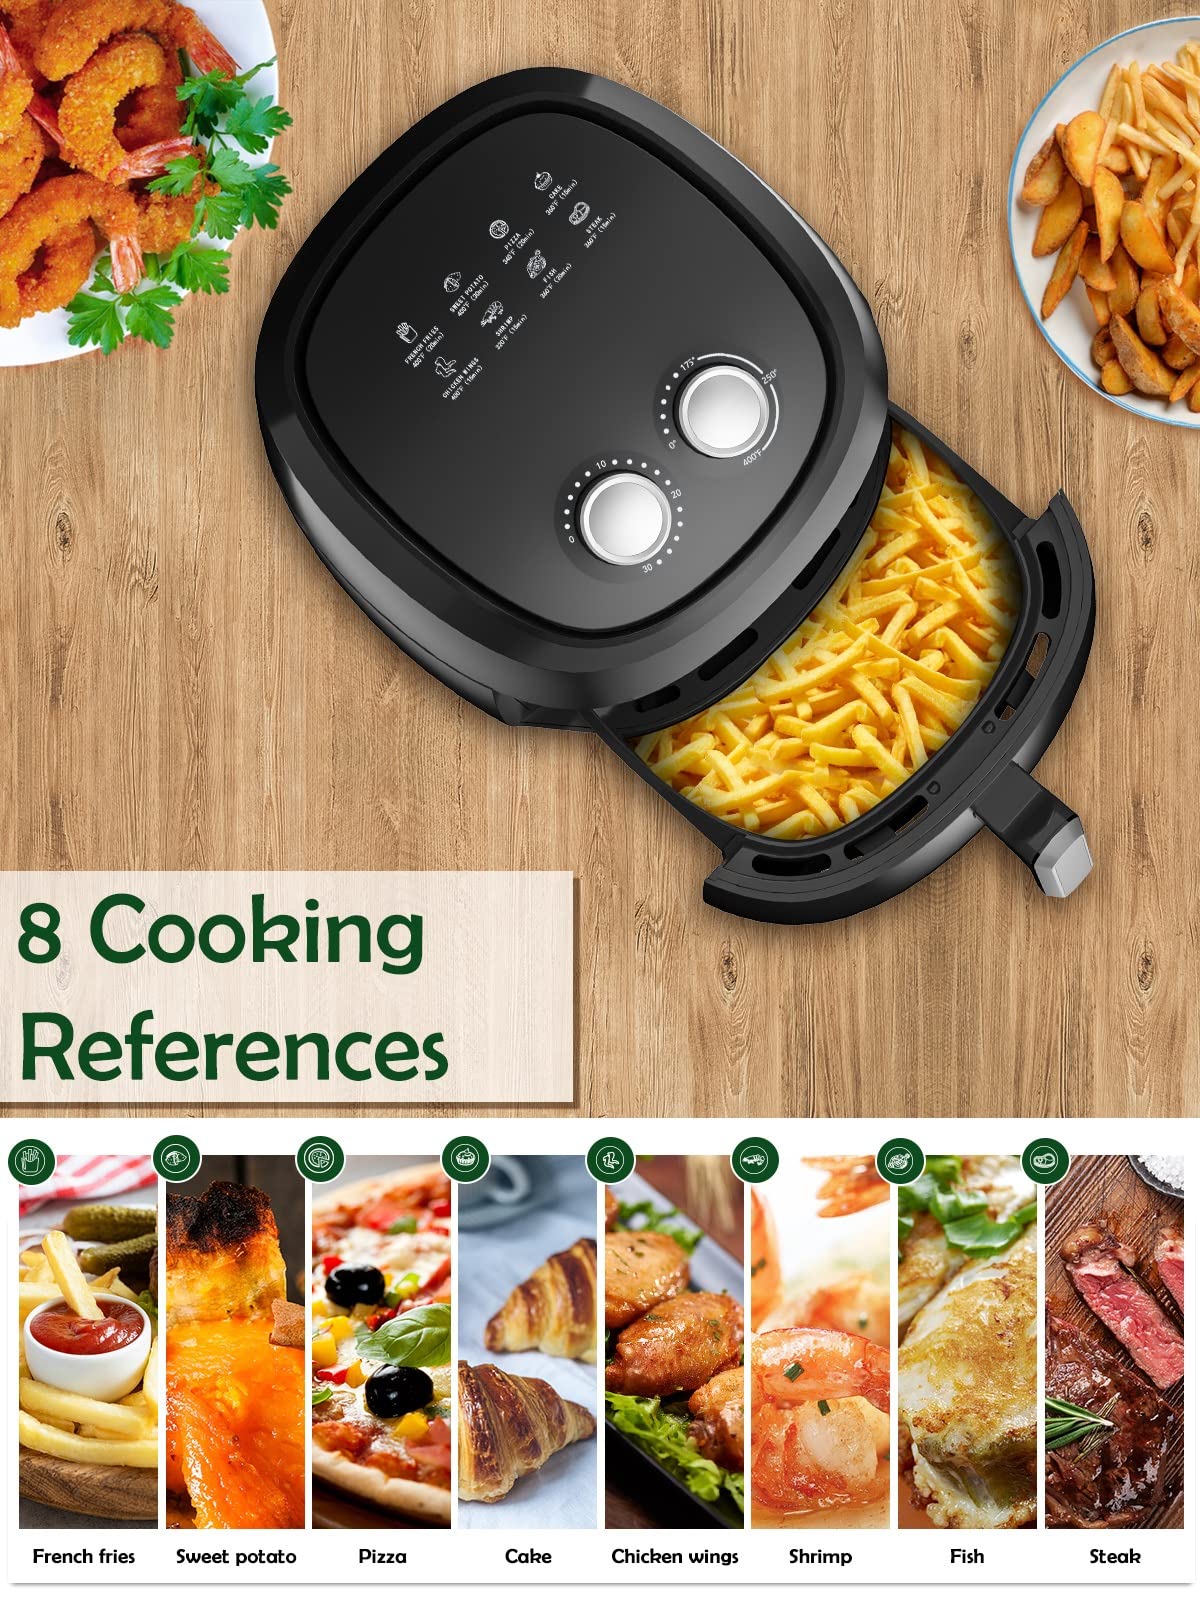 Air Fryer 8 Preset Menus 4.5 QT Airfryer Easy to Use with Adjustable Temperature Control with 8 Cooking References Nonstick Tray Auto Shutoff 1400W Hot Air Fryer Black